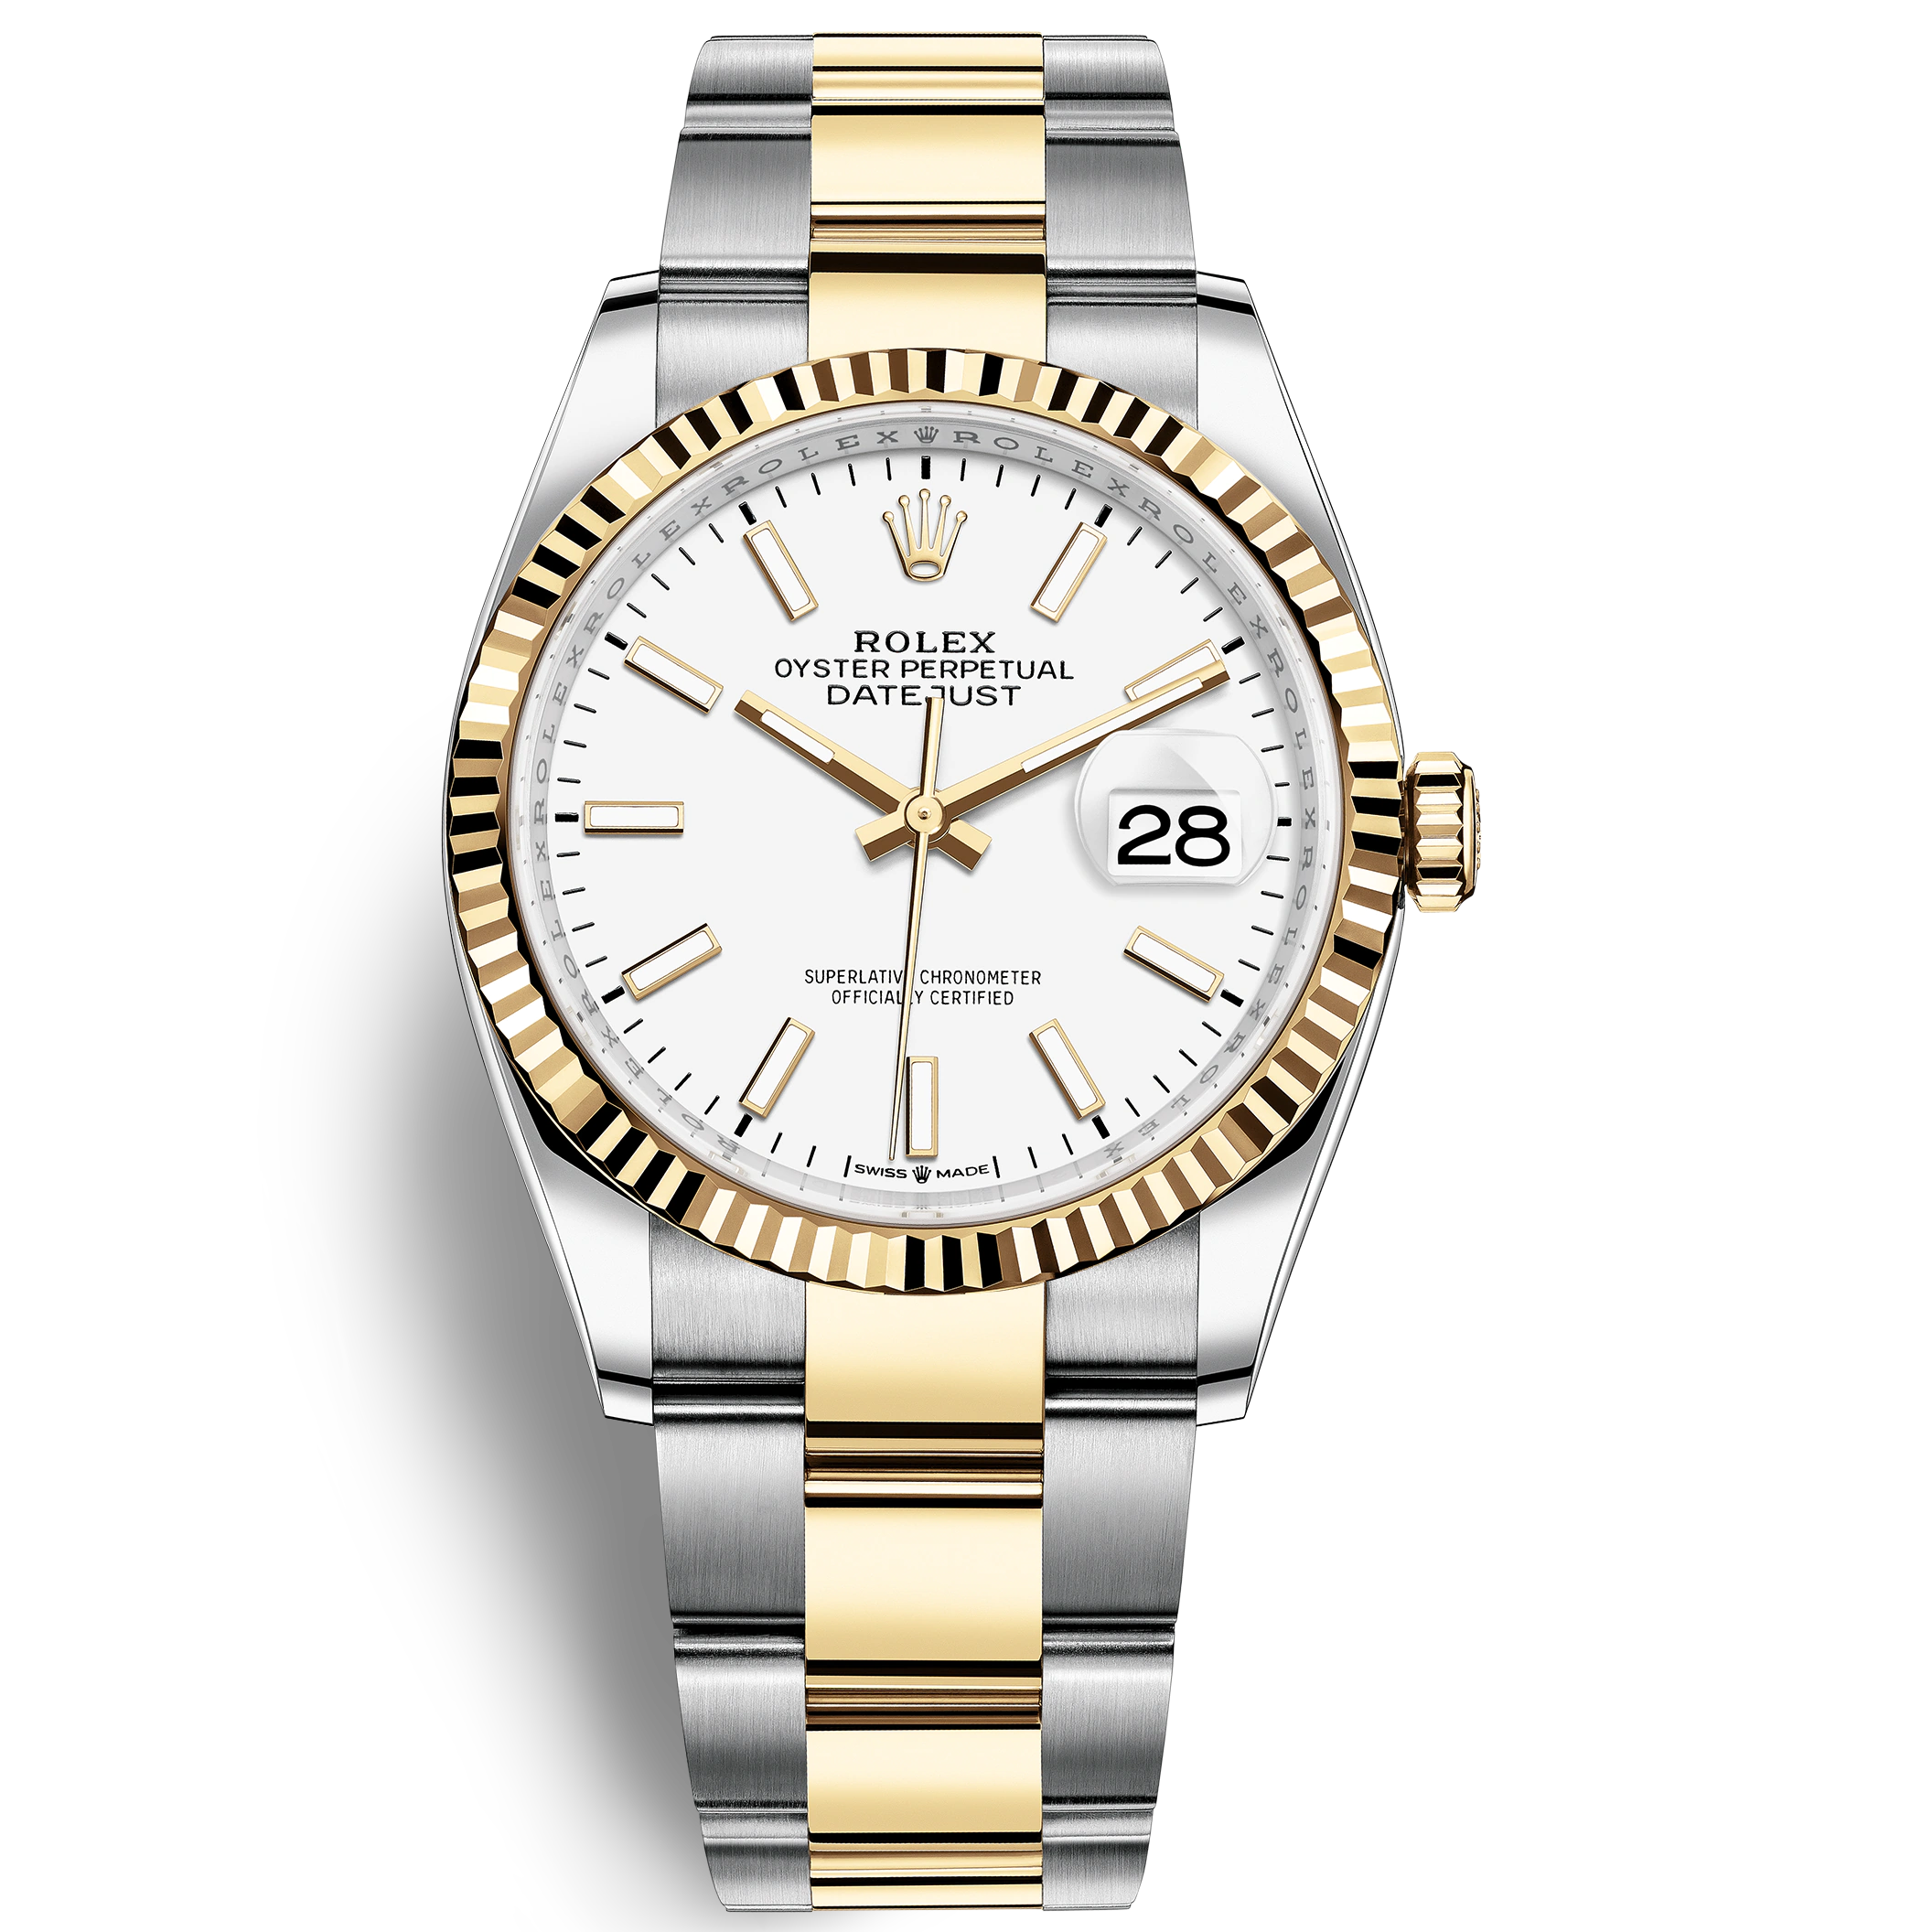 Rolex Datejust 36 126233 Mặt Số Trắng Dây Đeo Oyster